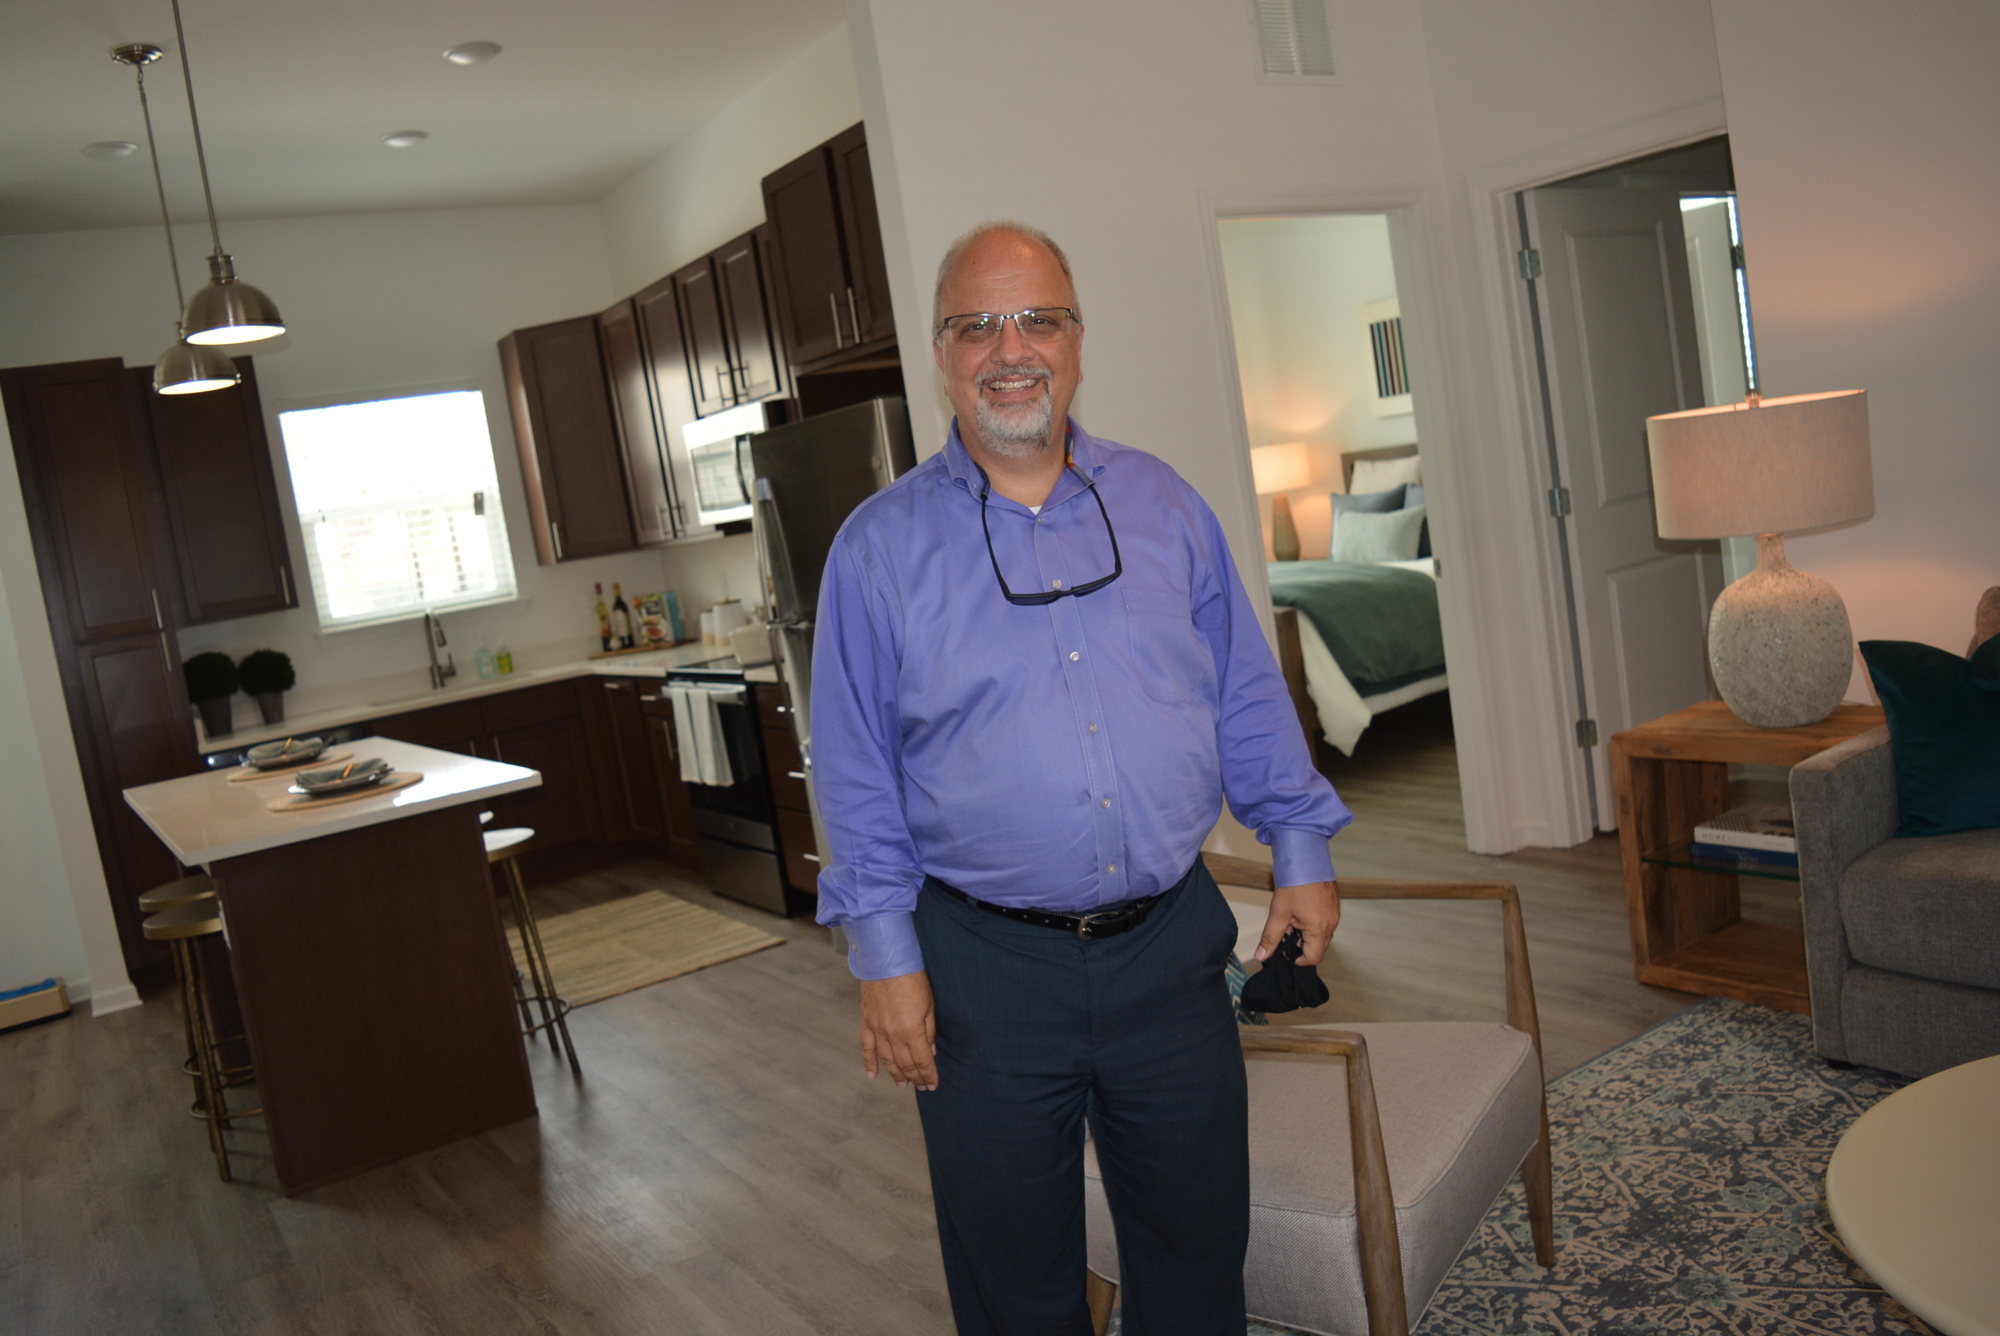 Vincent Ascioti, business manager for the complex, shows off one of the units, which became available for touring Aug. 14.  Each unit has its own private fenced backyard.